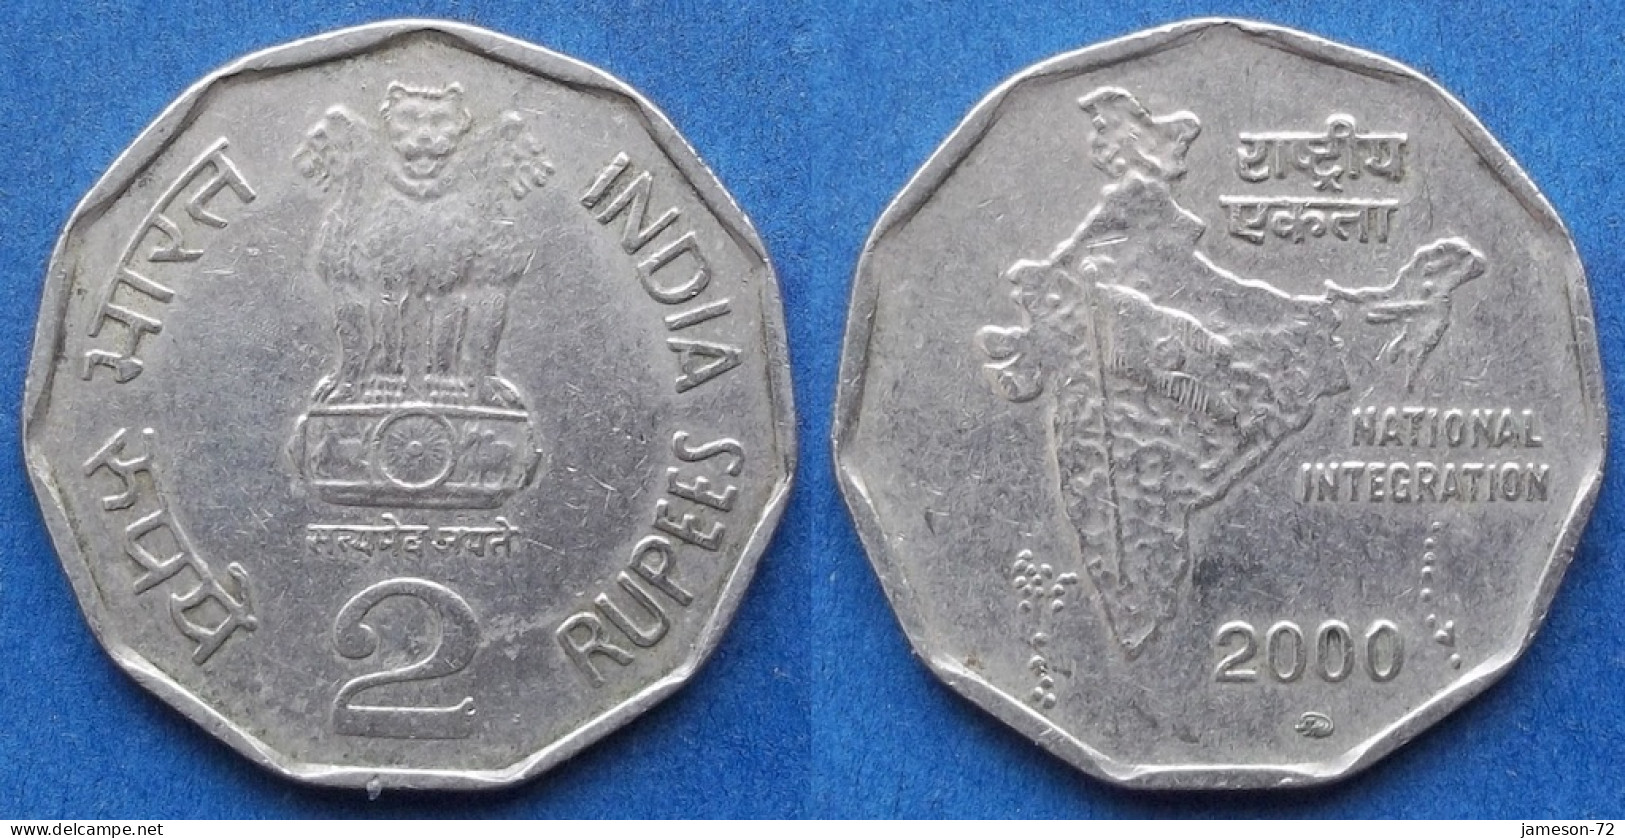 INDIA - 2 Rupees 2000 "Flag On Map" KM# 121.5 Republic Decimal Coinage (1957) - Edelweiss Coins - Georgien